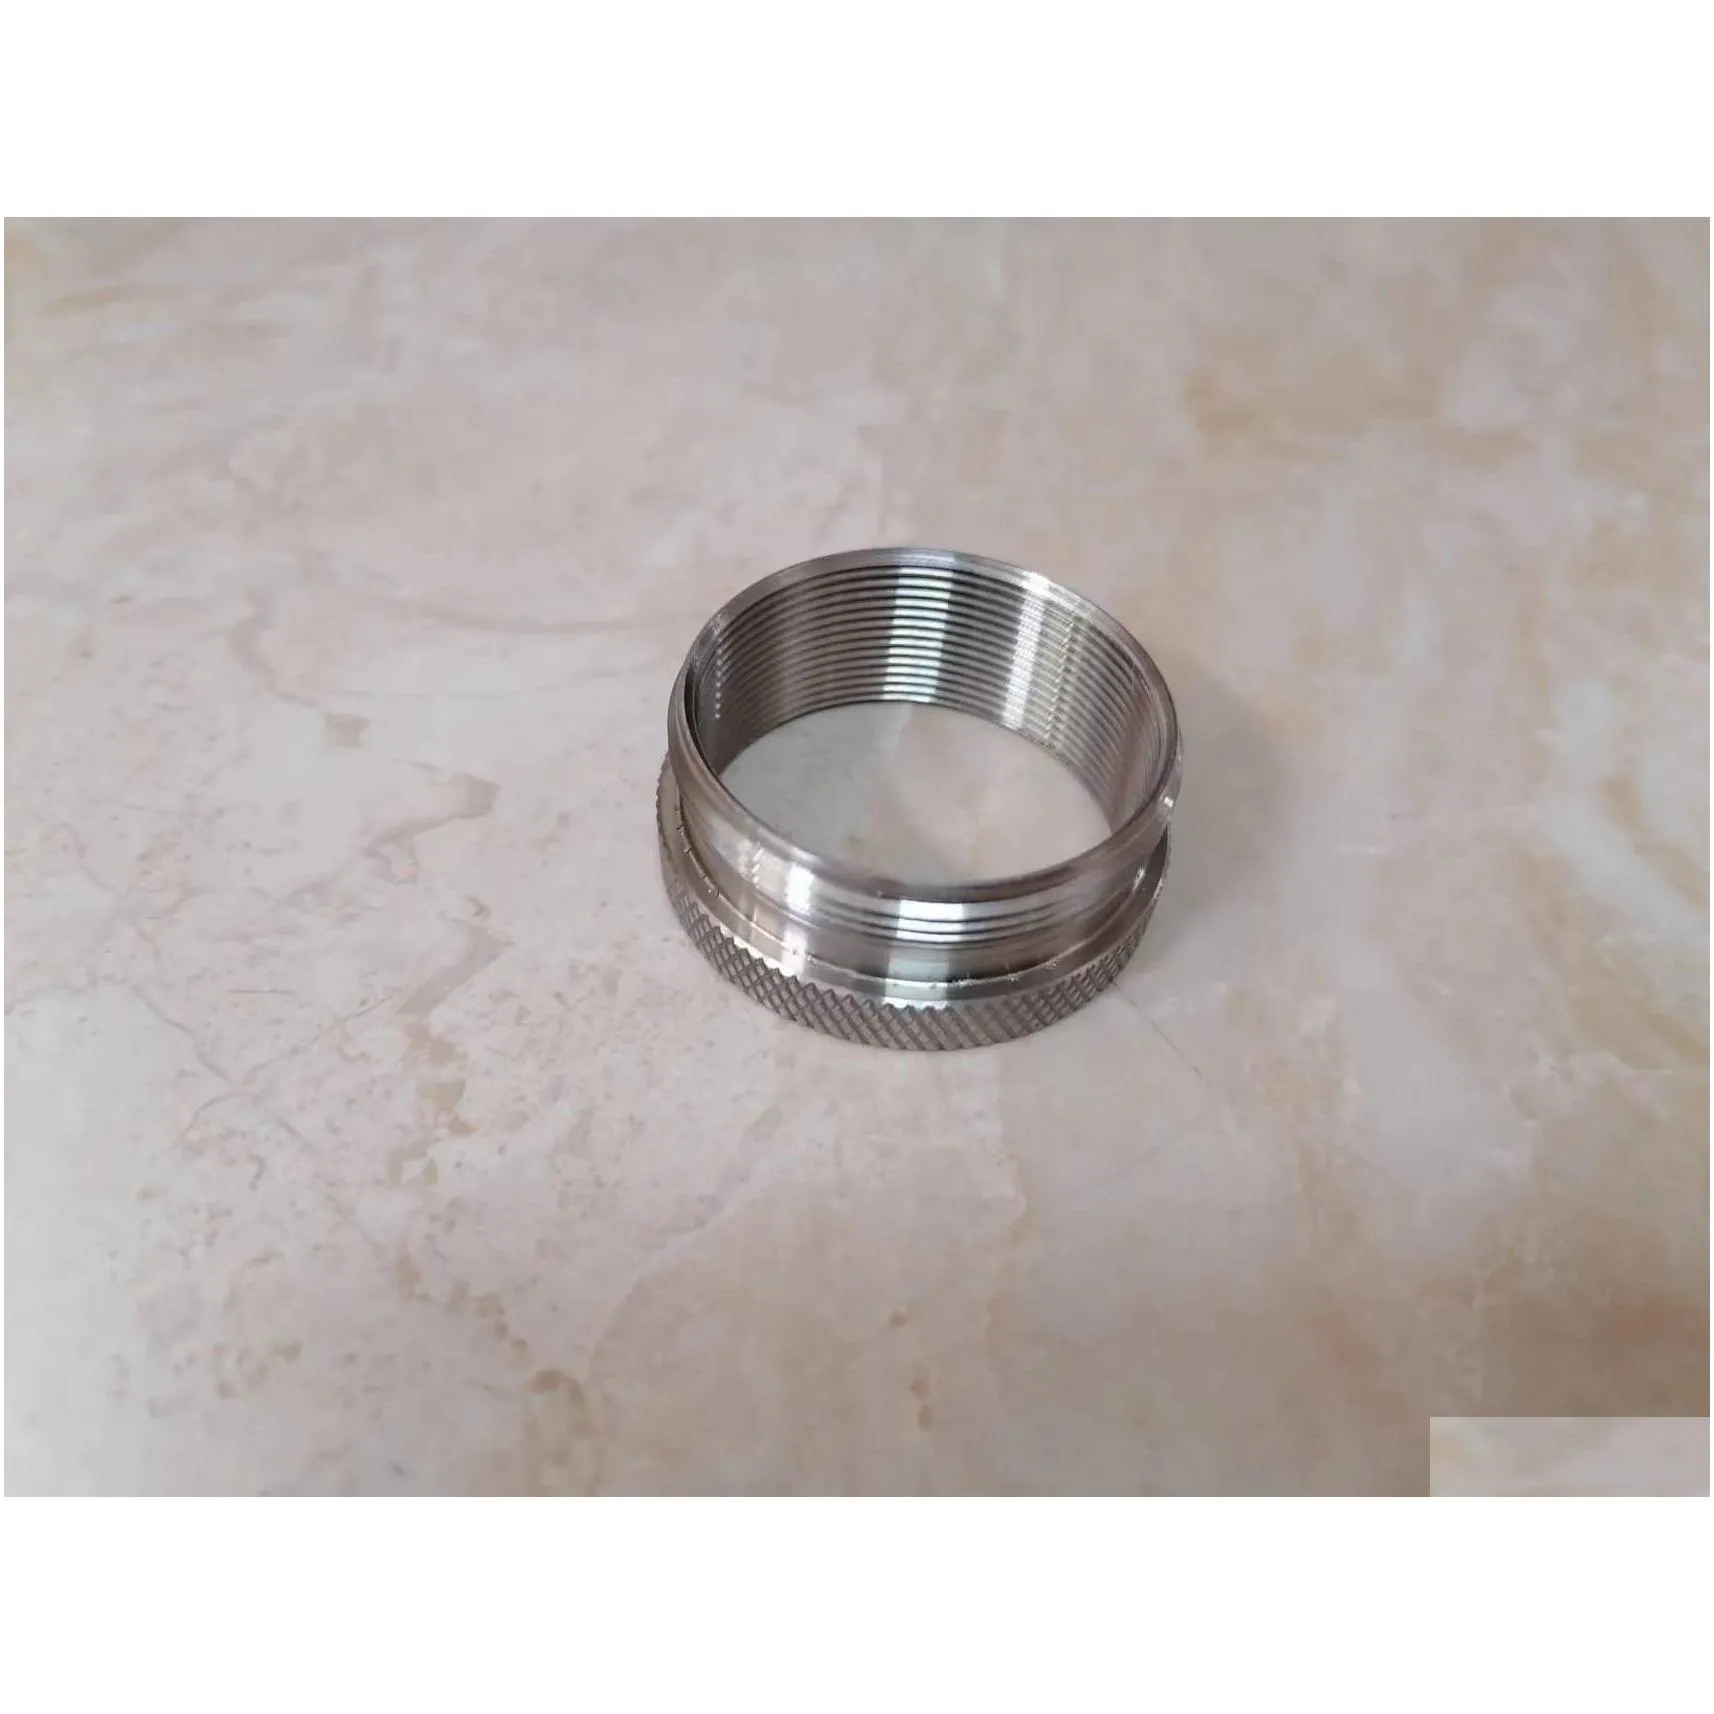 stainless steel 1.375x24 thread adapter for 6.2 inch titanium solvent trap